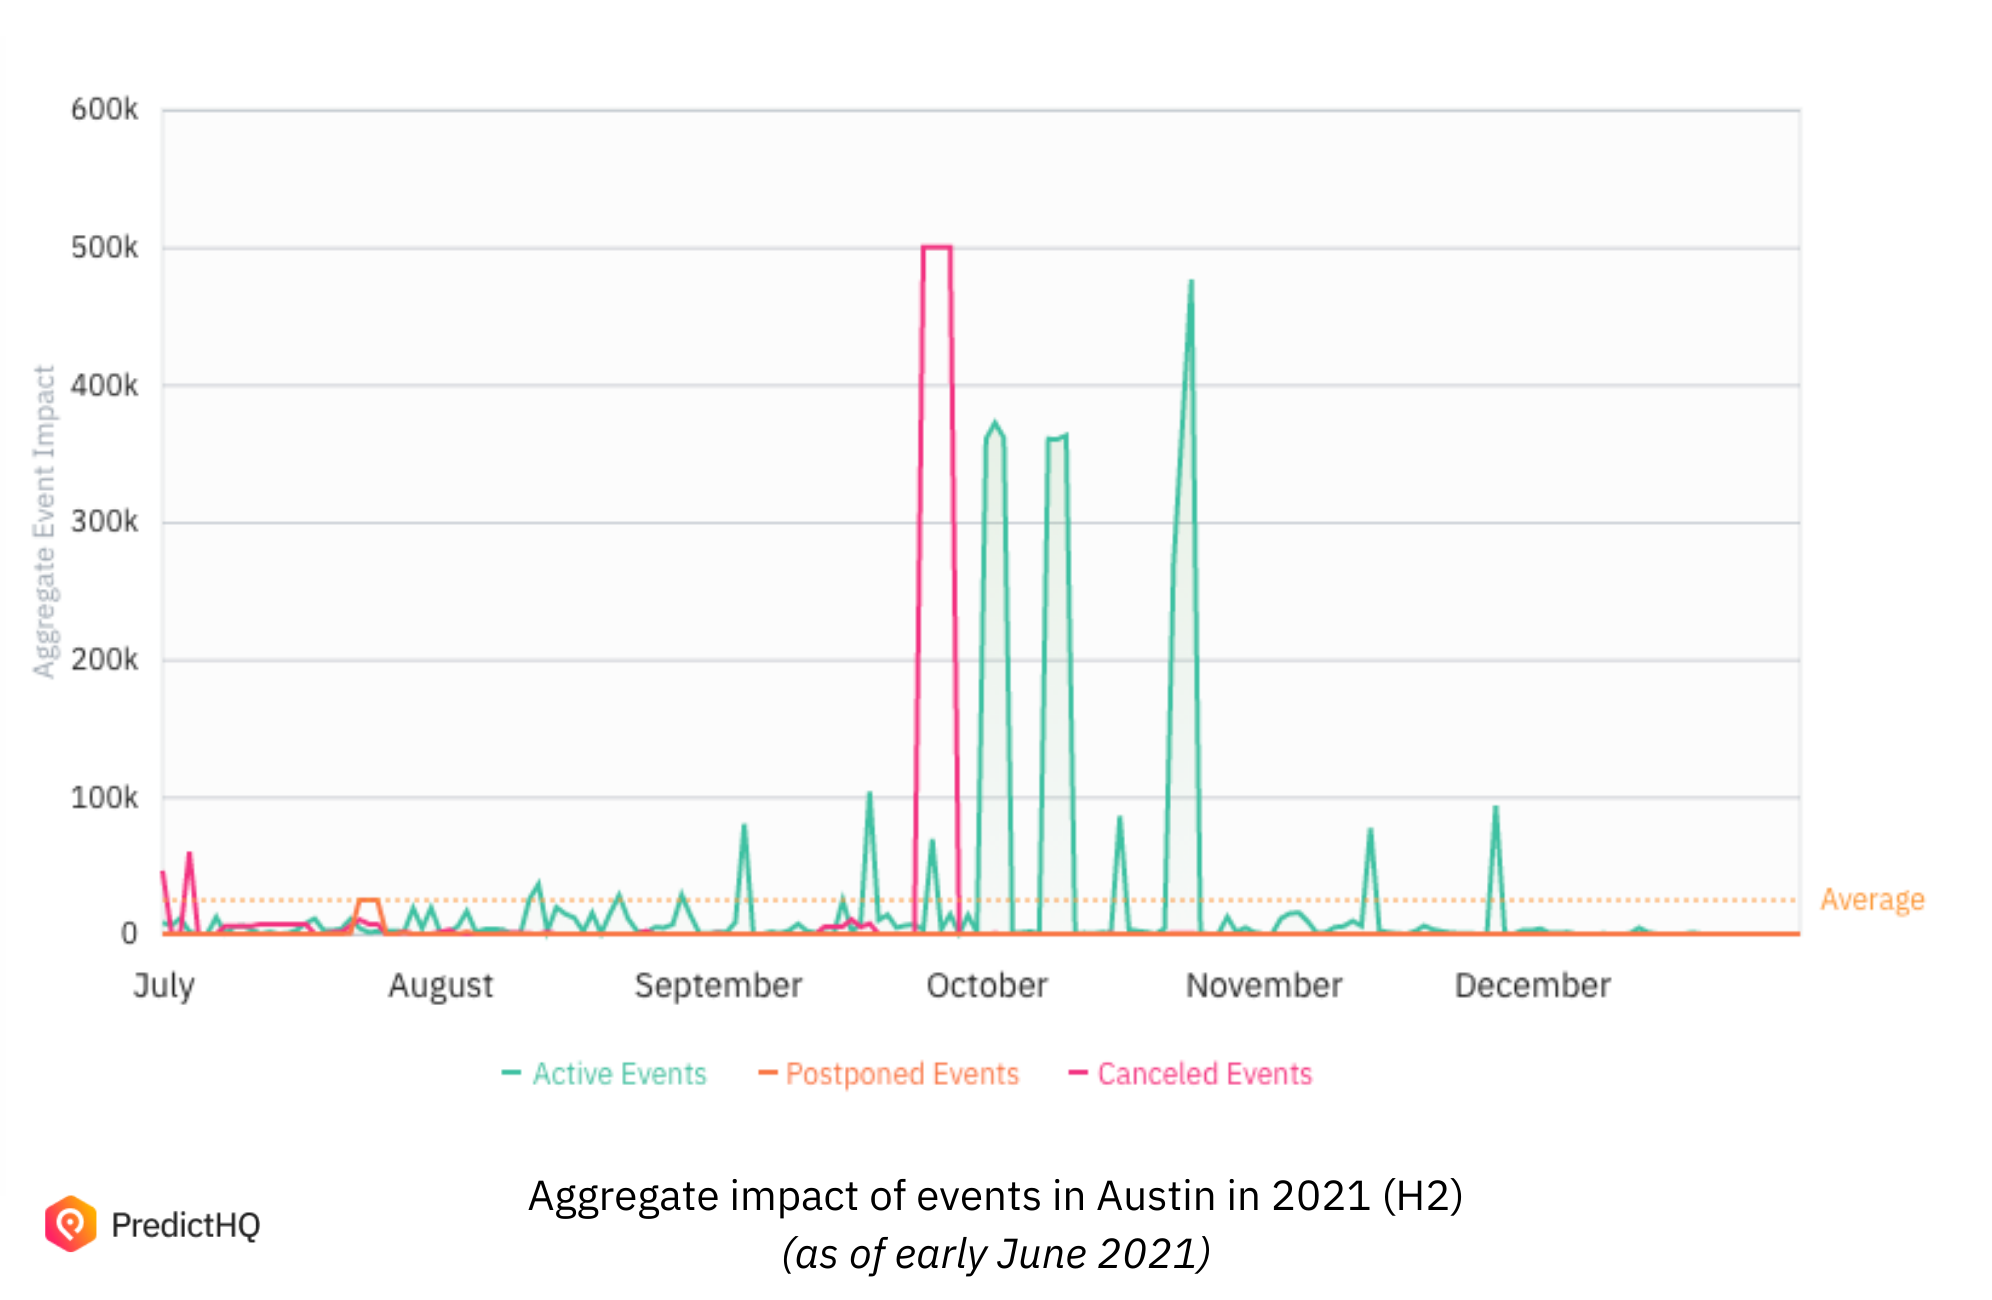 Upcoming event impact in Austin, Texas in 2021